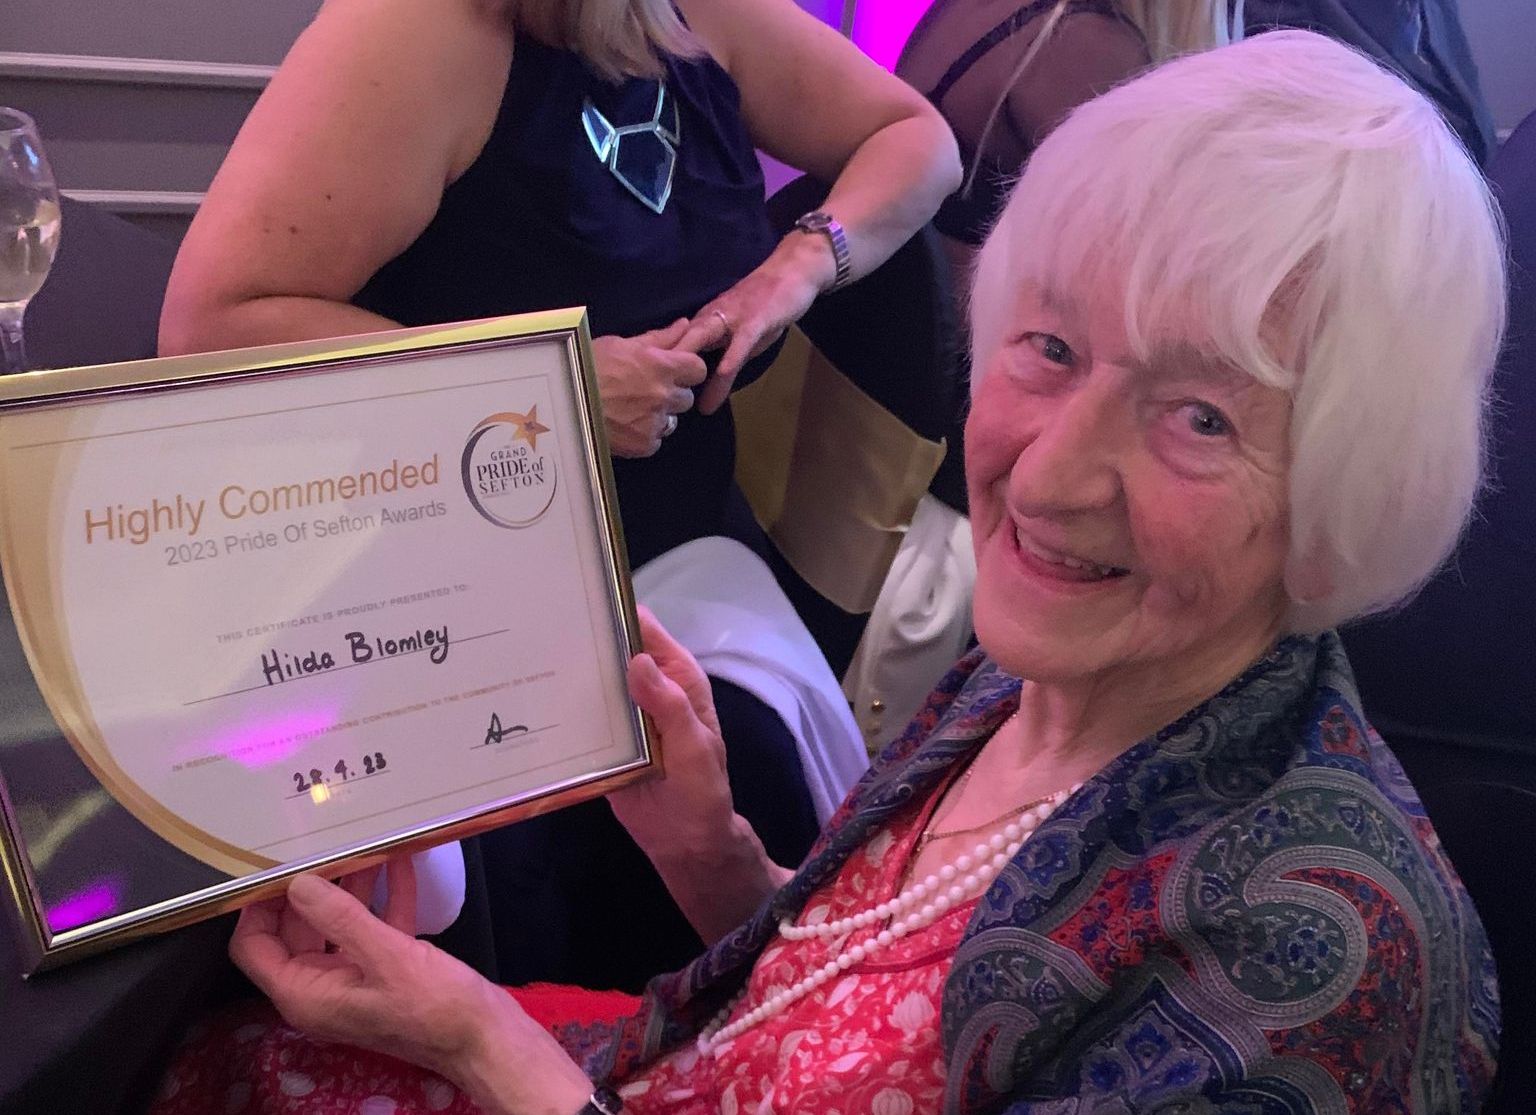 Hilda Blomley was a finalist at the 2023 Pride Of Sefton Awards. Photo by Hayley Jones